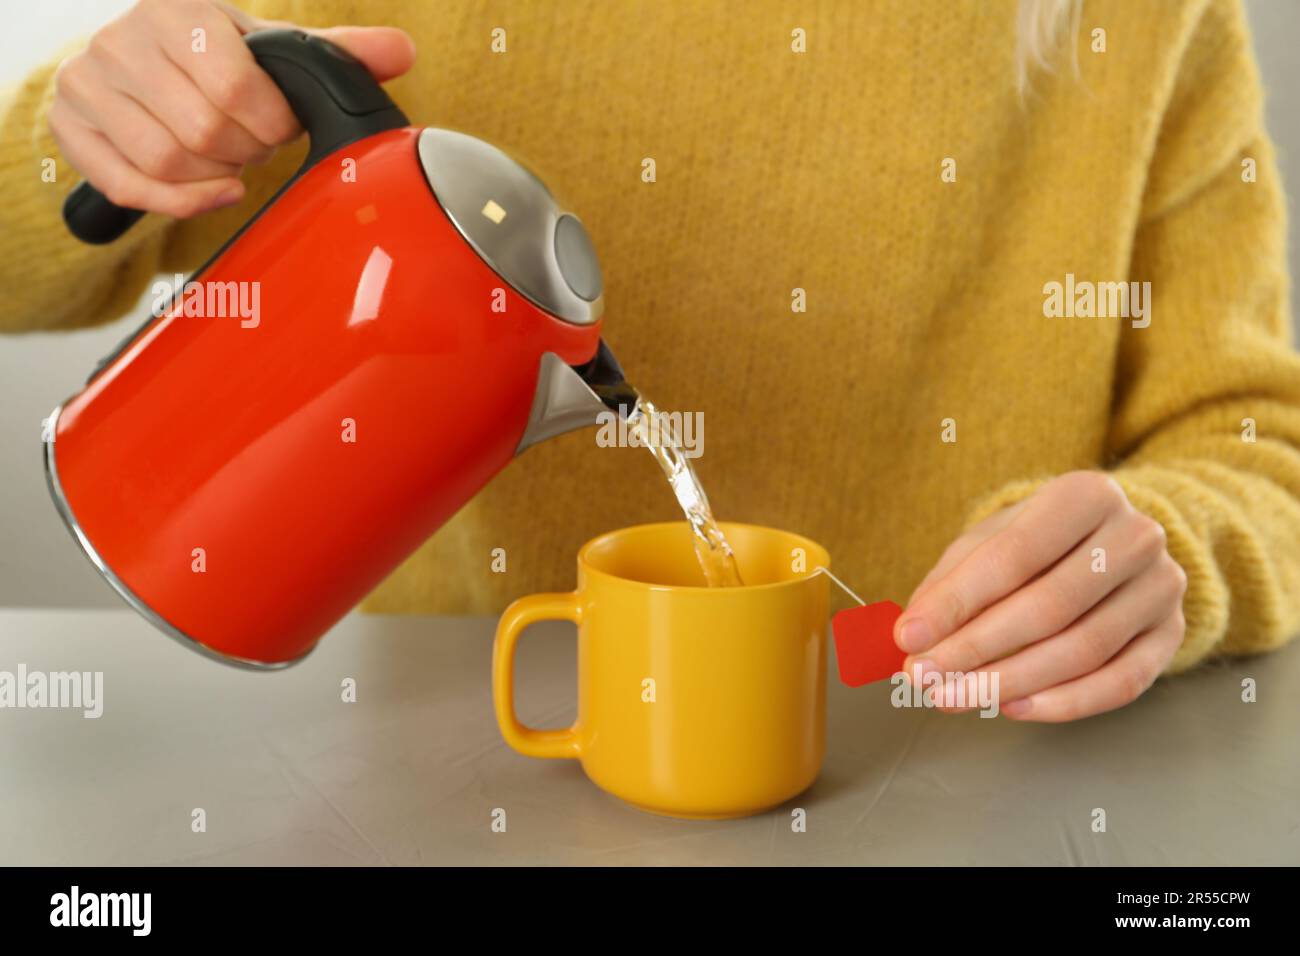 https://c8.alamy.com/comp/2R55CPW/woman-pouring-hot-water-into-cup-with-tea-bag-at-grey-table-closeup-2R55CPW.jpg